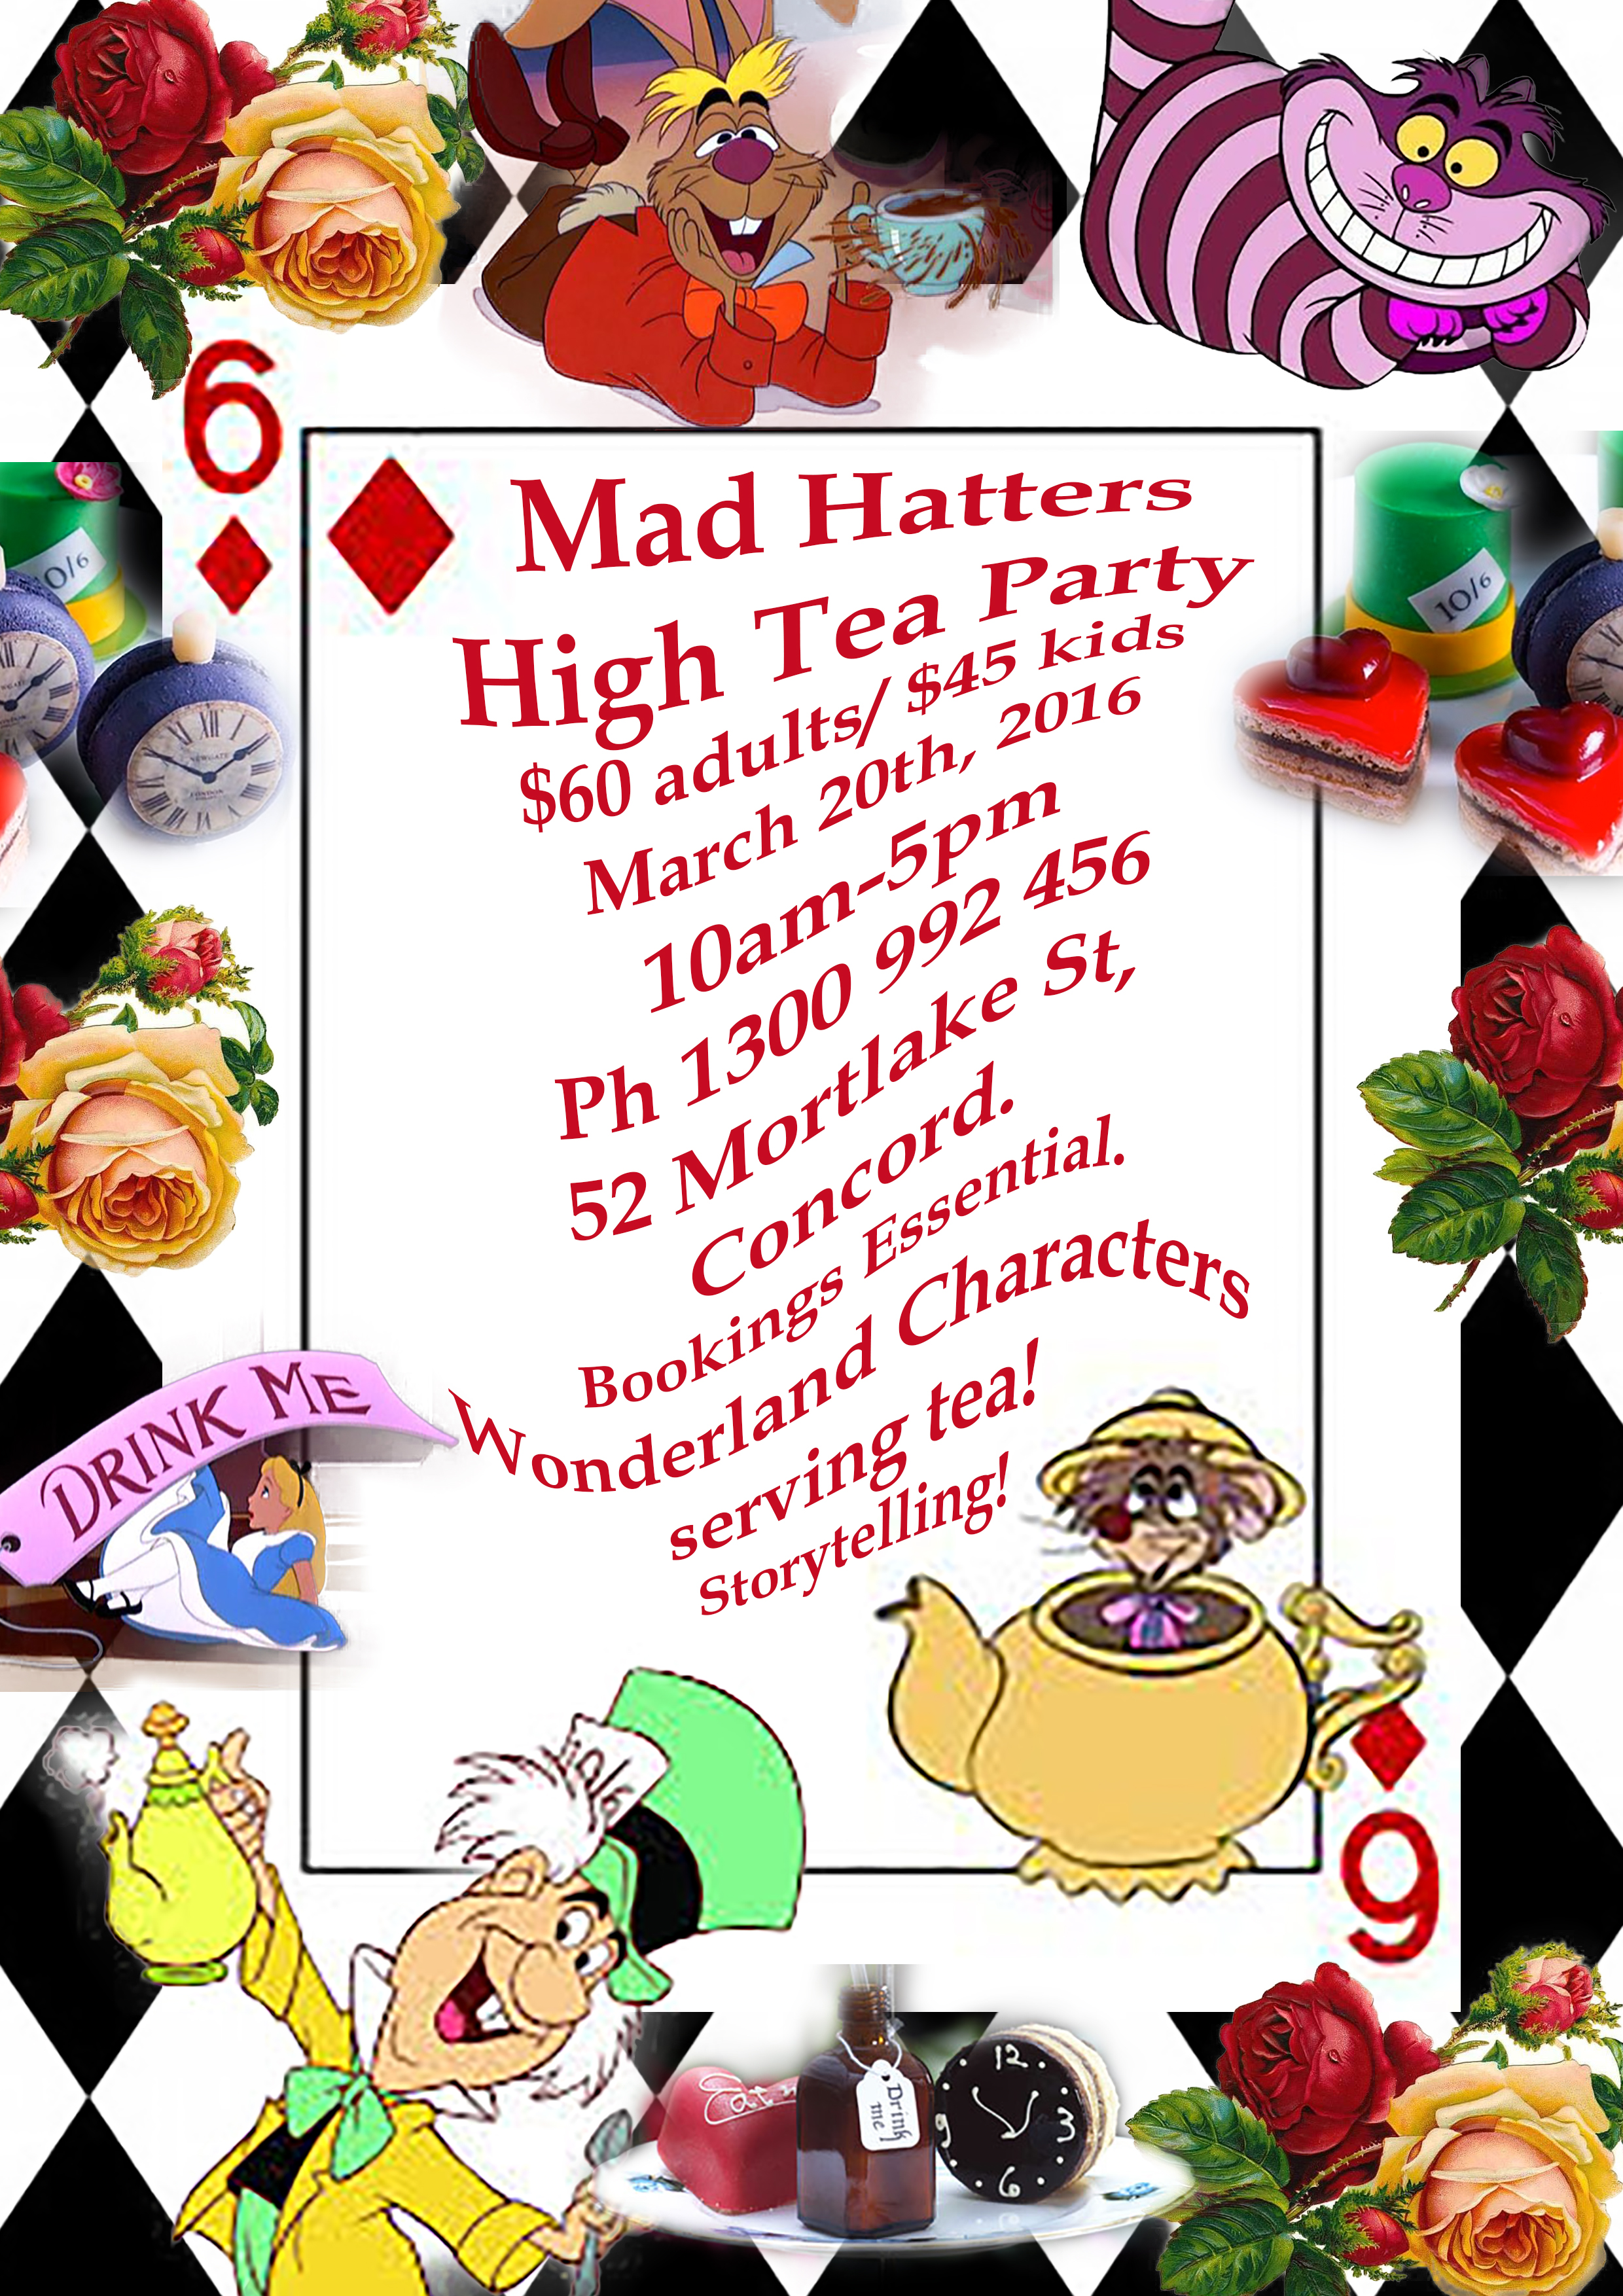 mad-hatter-s-tea-party-set-for-march-finding-fairyland-and-fairy-and-the-frog-creperie